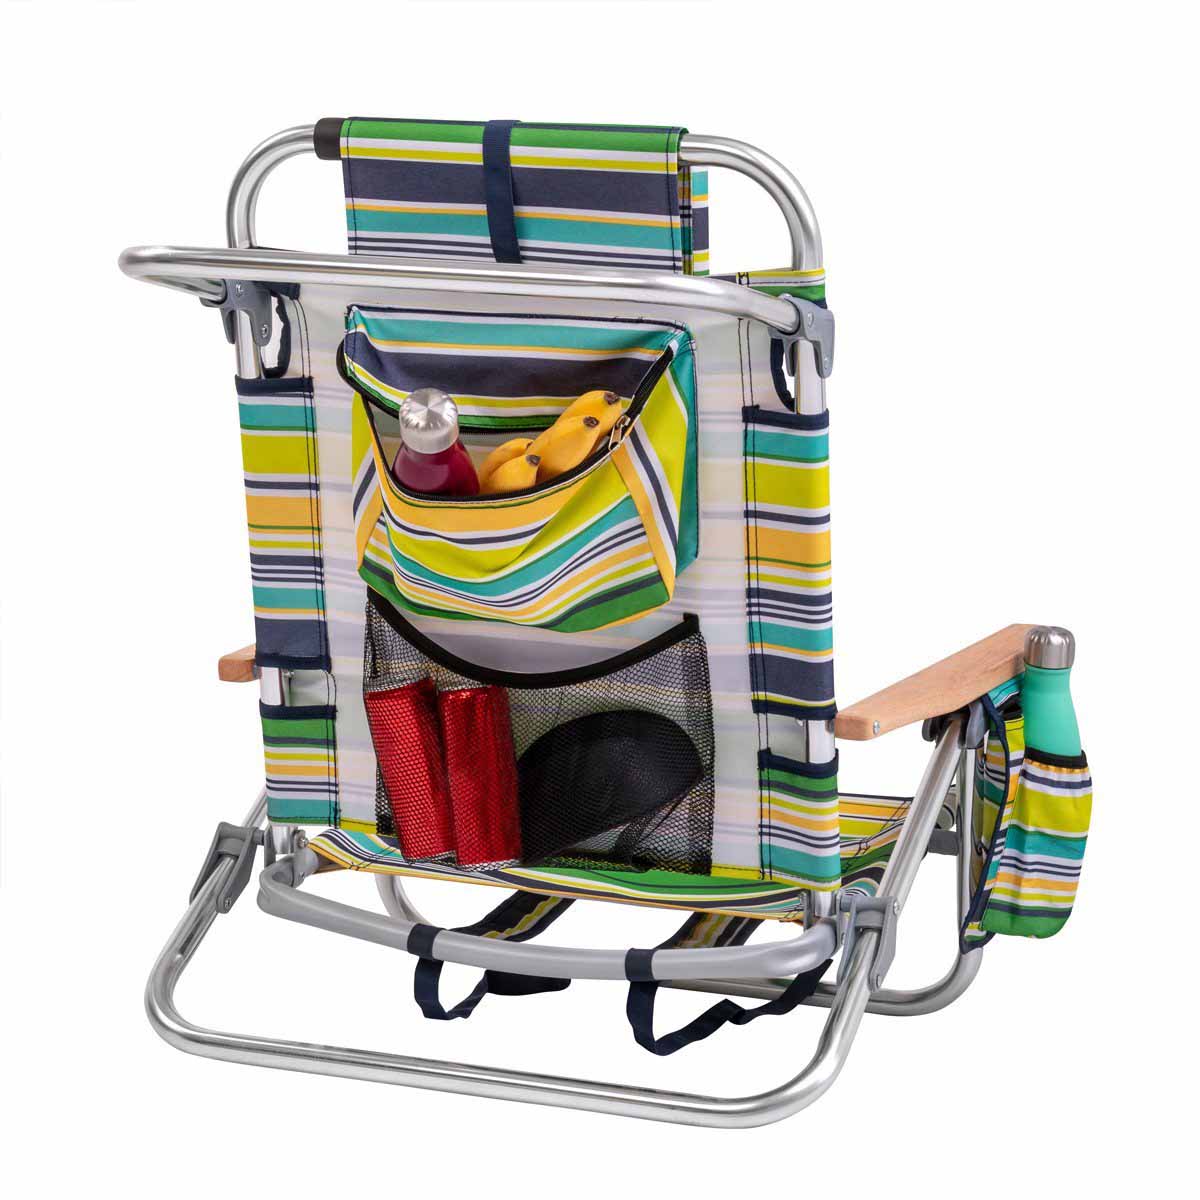 Backpack Beach Chair with Headrest has two spacious pockets on the back and one on the armrest to store your stuff